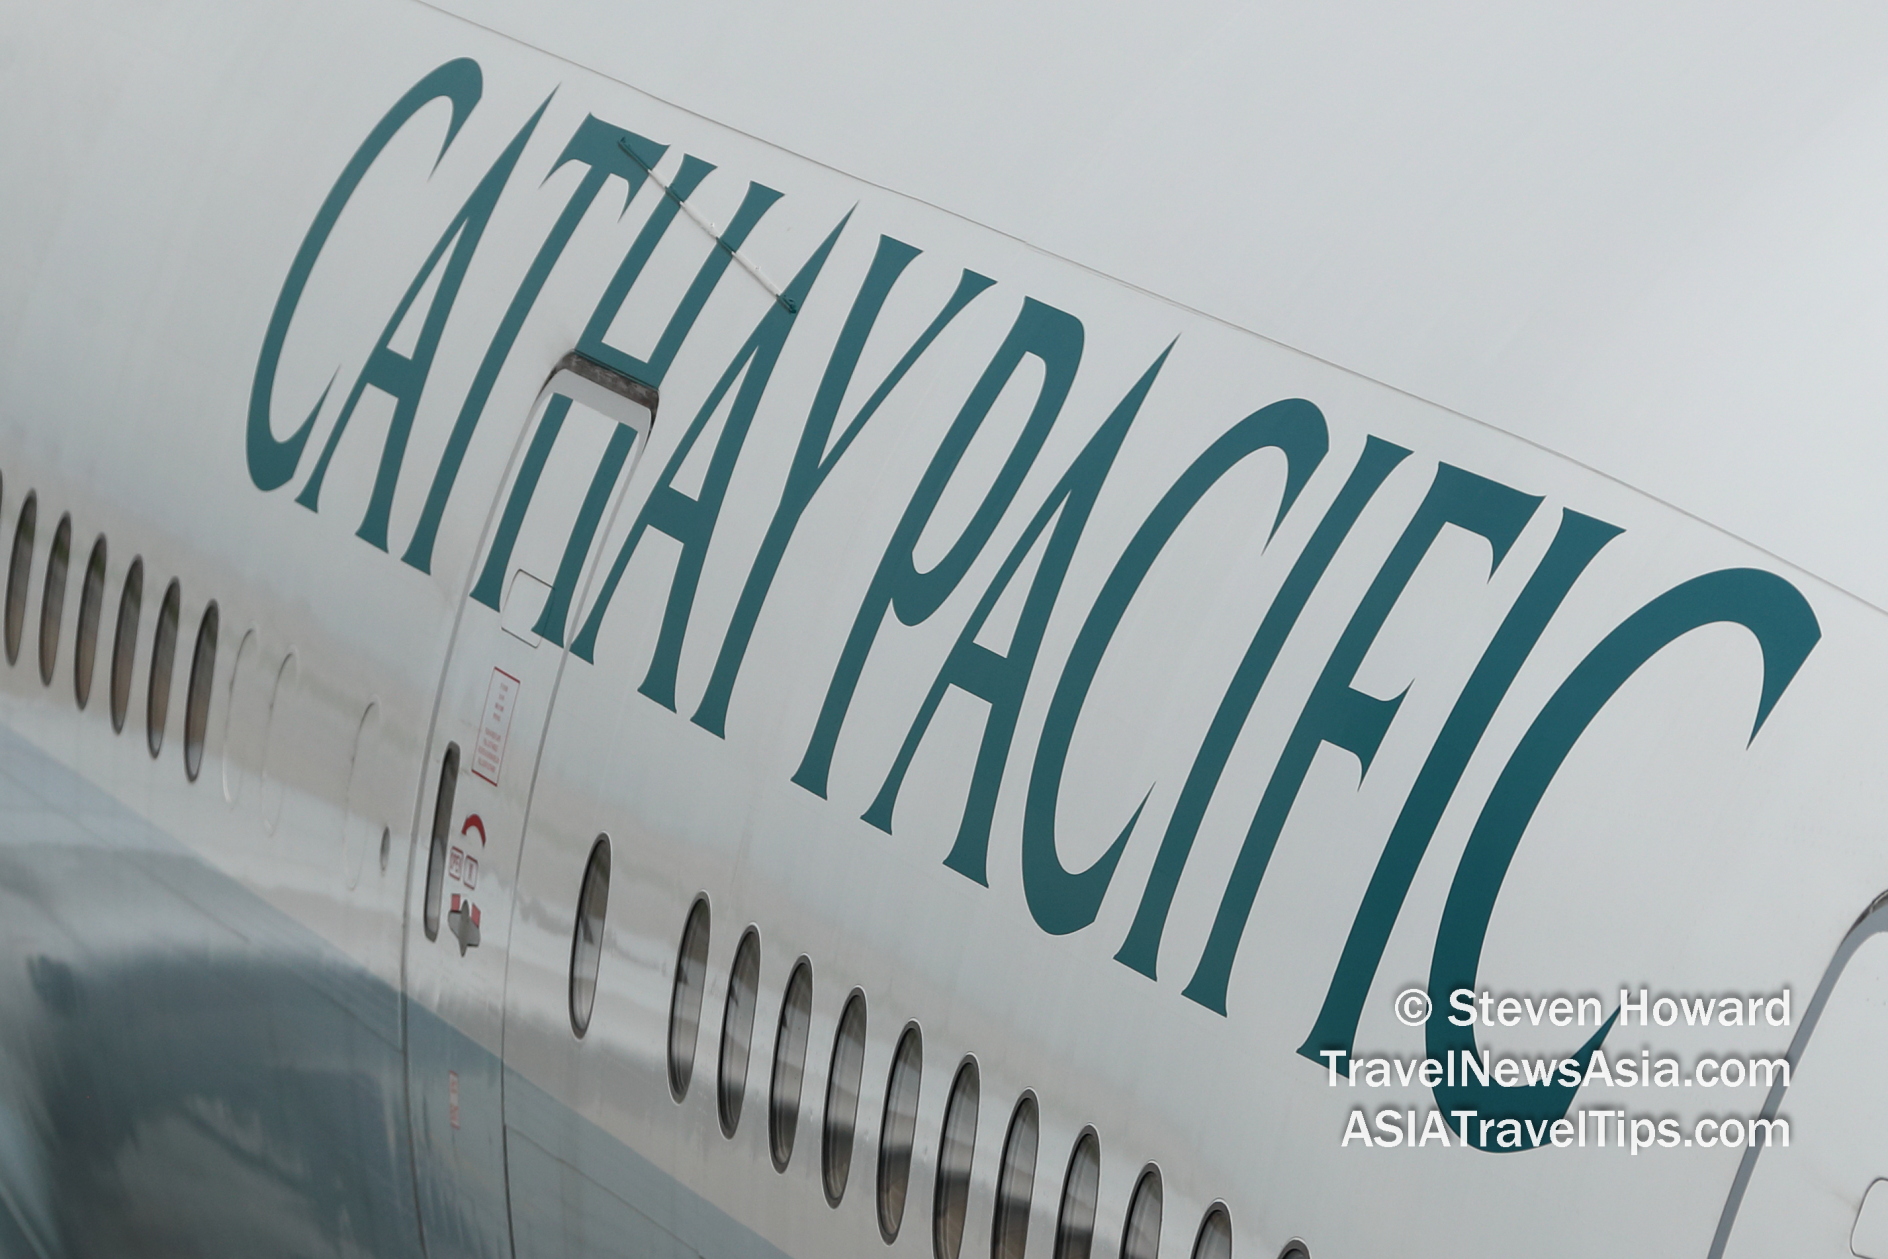 Cathay Pacific livery on an Airbus A350. Picture by Steven Howard of TravelNewsAsia.com Click to enlarge.